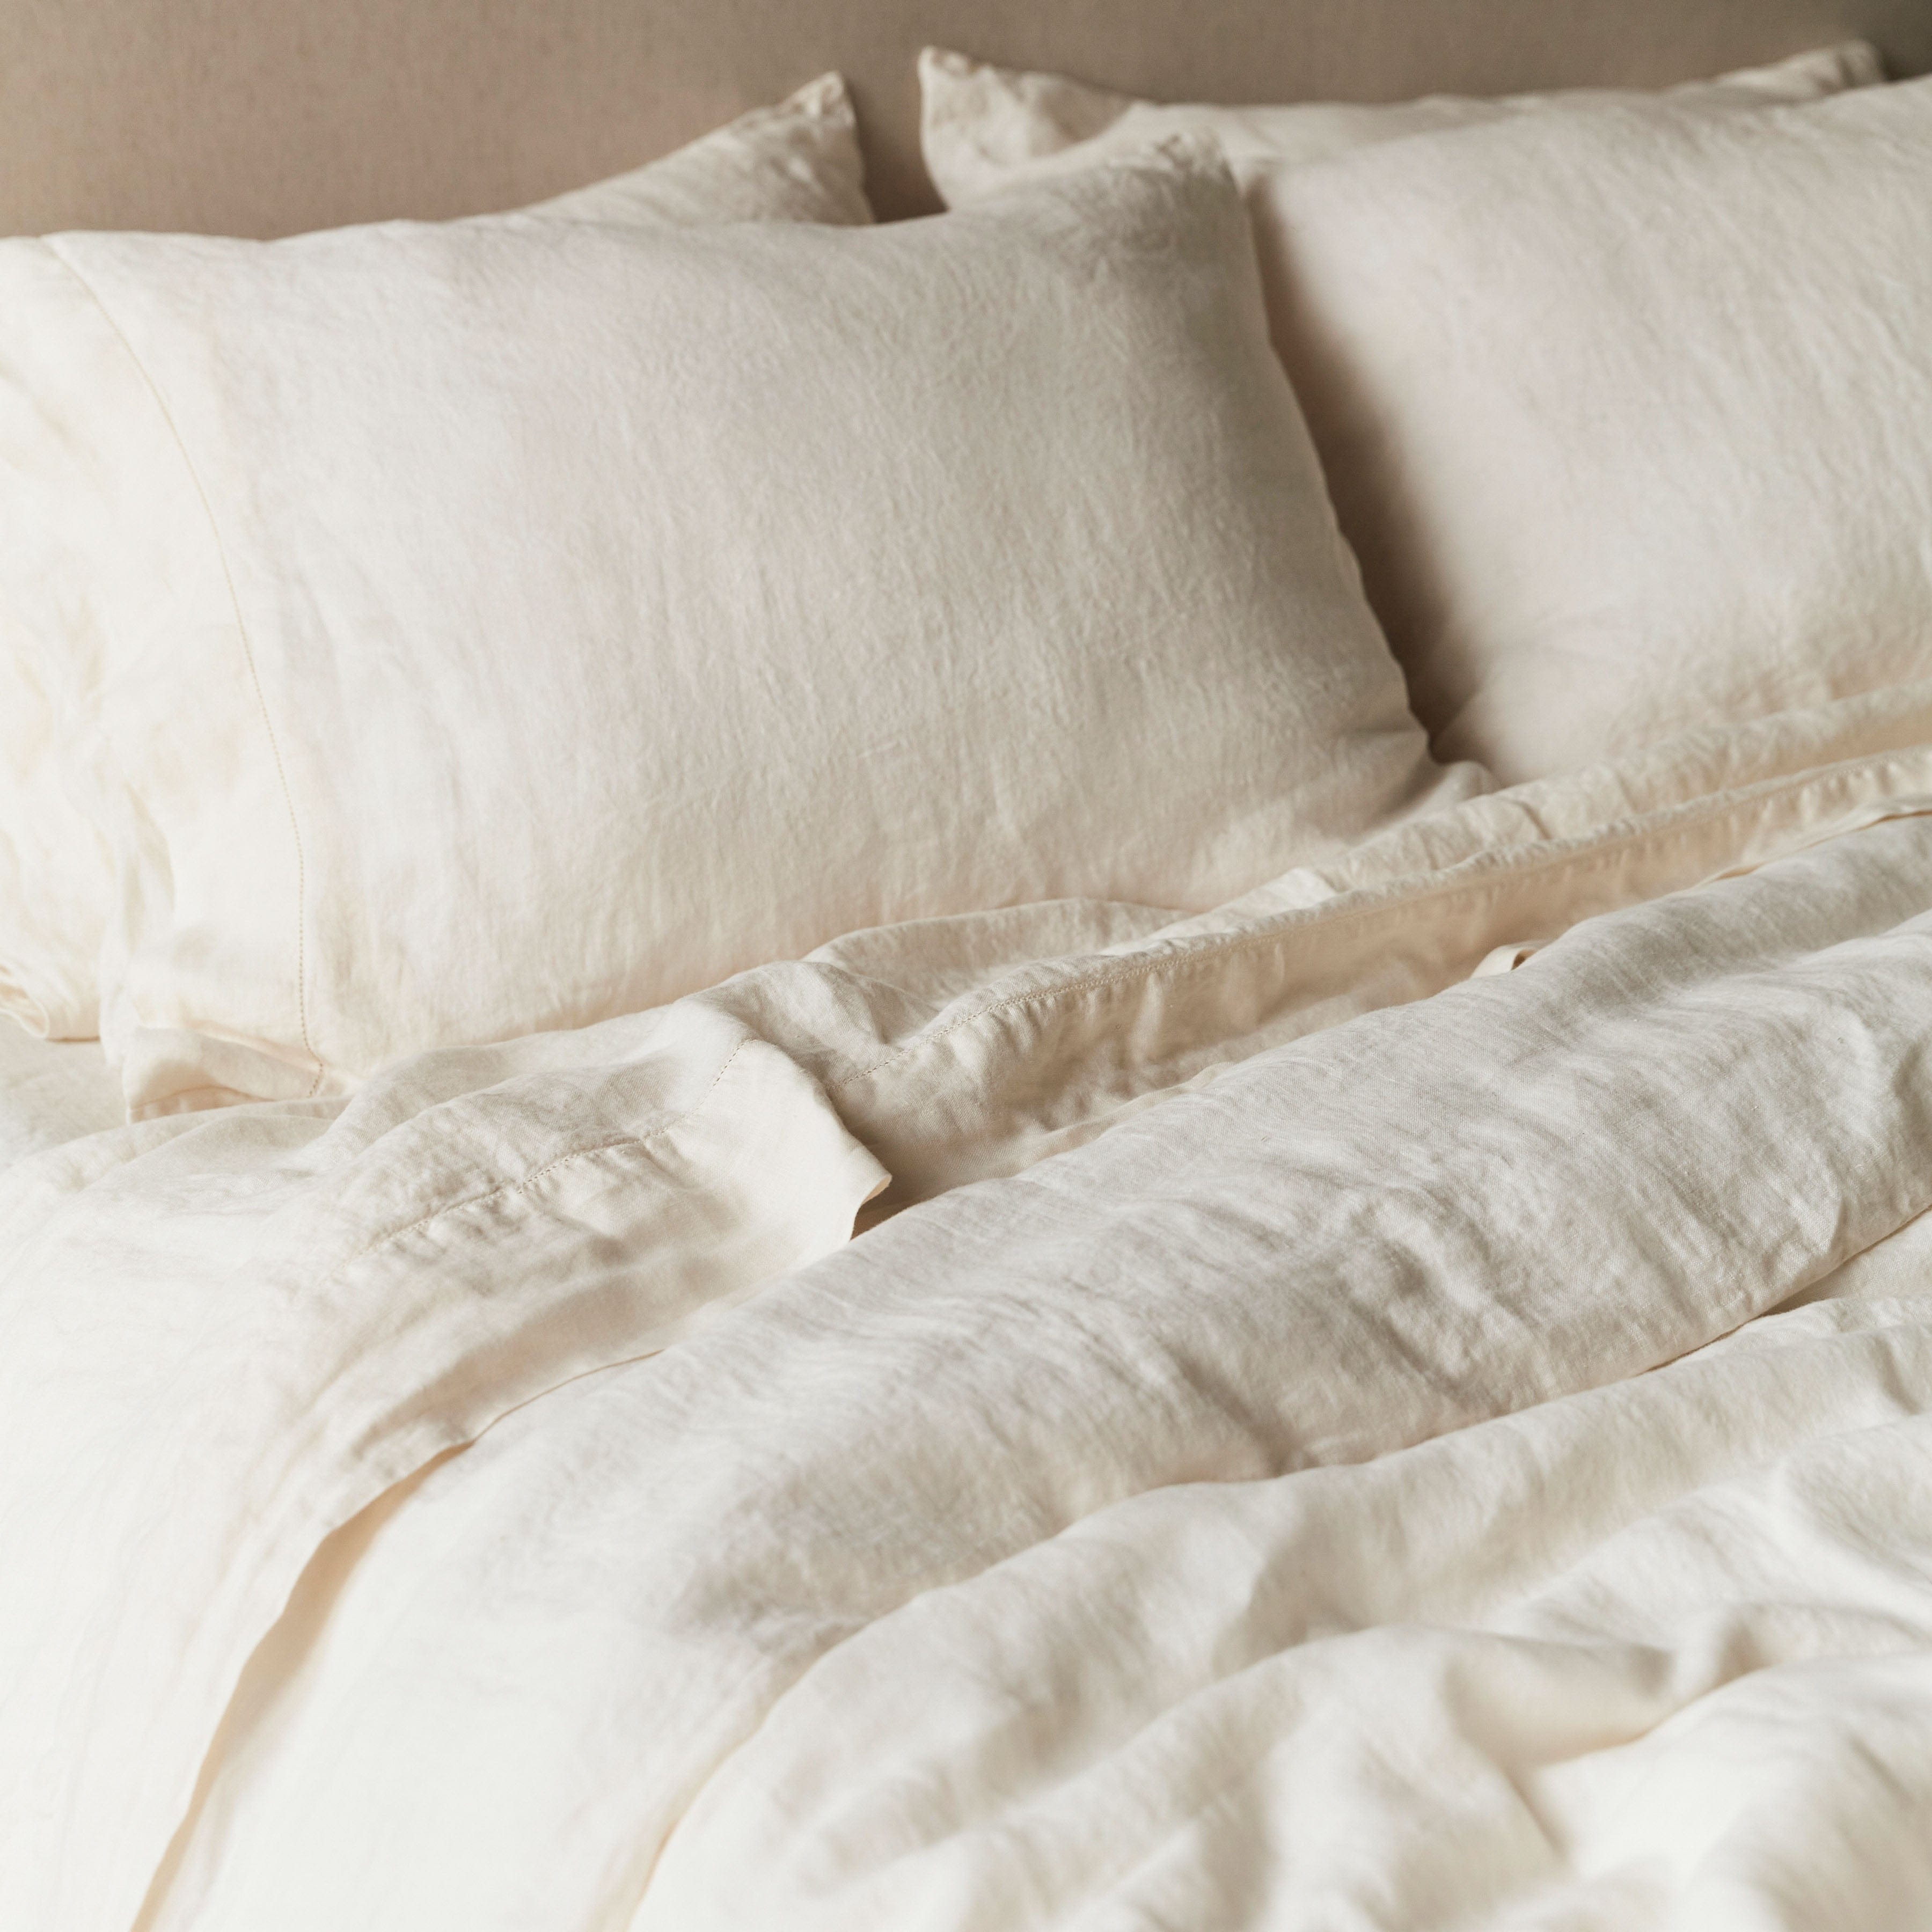 The Citizenry Stonewashed Linen Duvet Cover | Full/Queen | Duvet Only | Ivory - Image 6